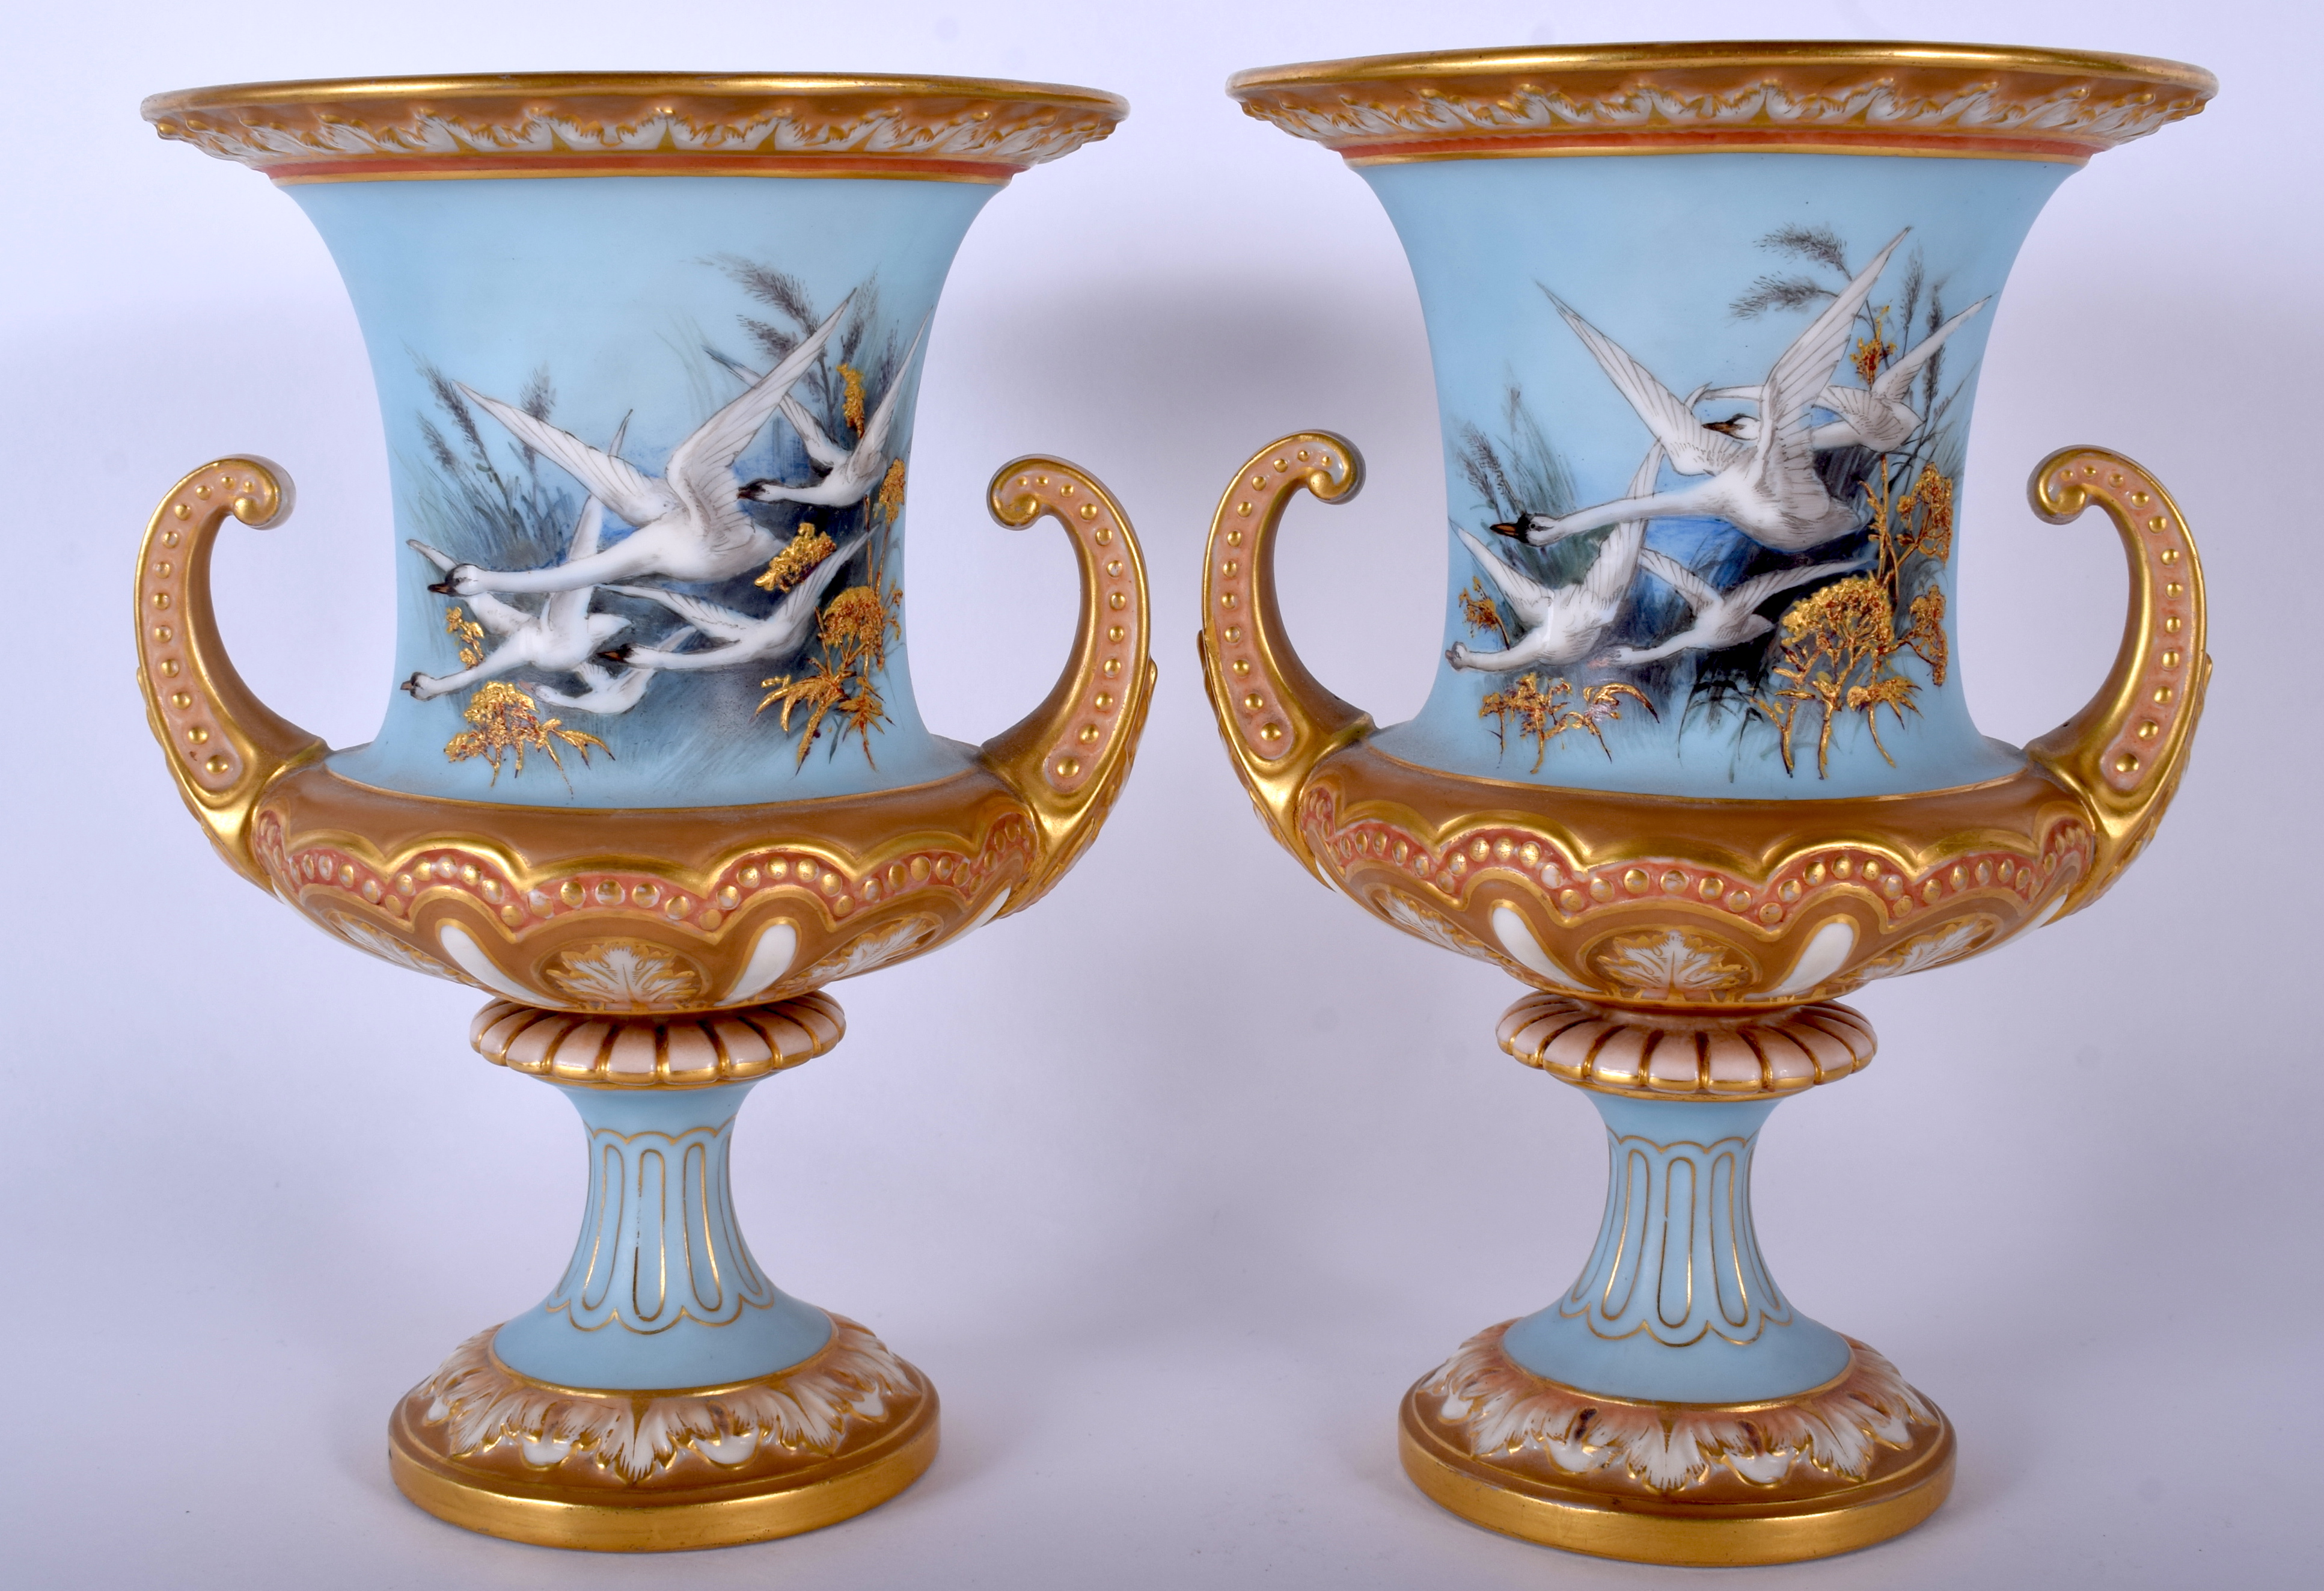 A PAIR OF ROYAL WORCESTER TWIN HANDLED PORCELAIN URN VASES by Charles Baldwyn, painted with swans.